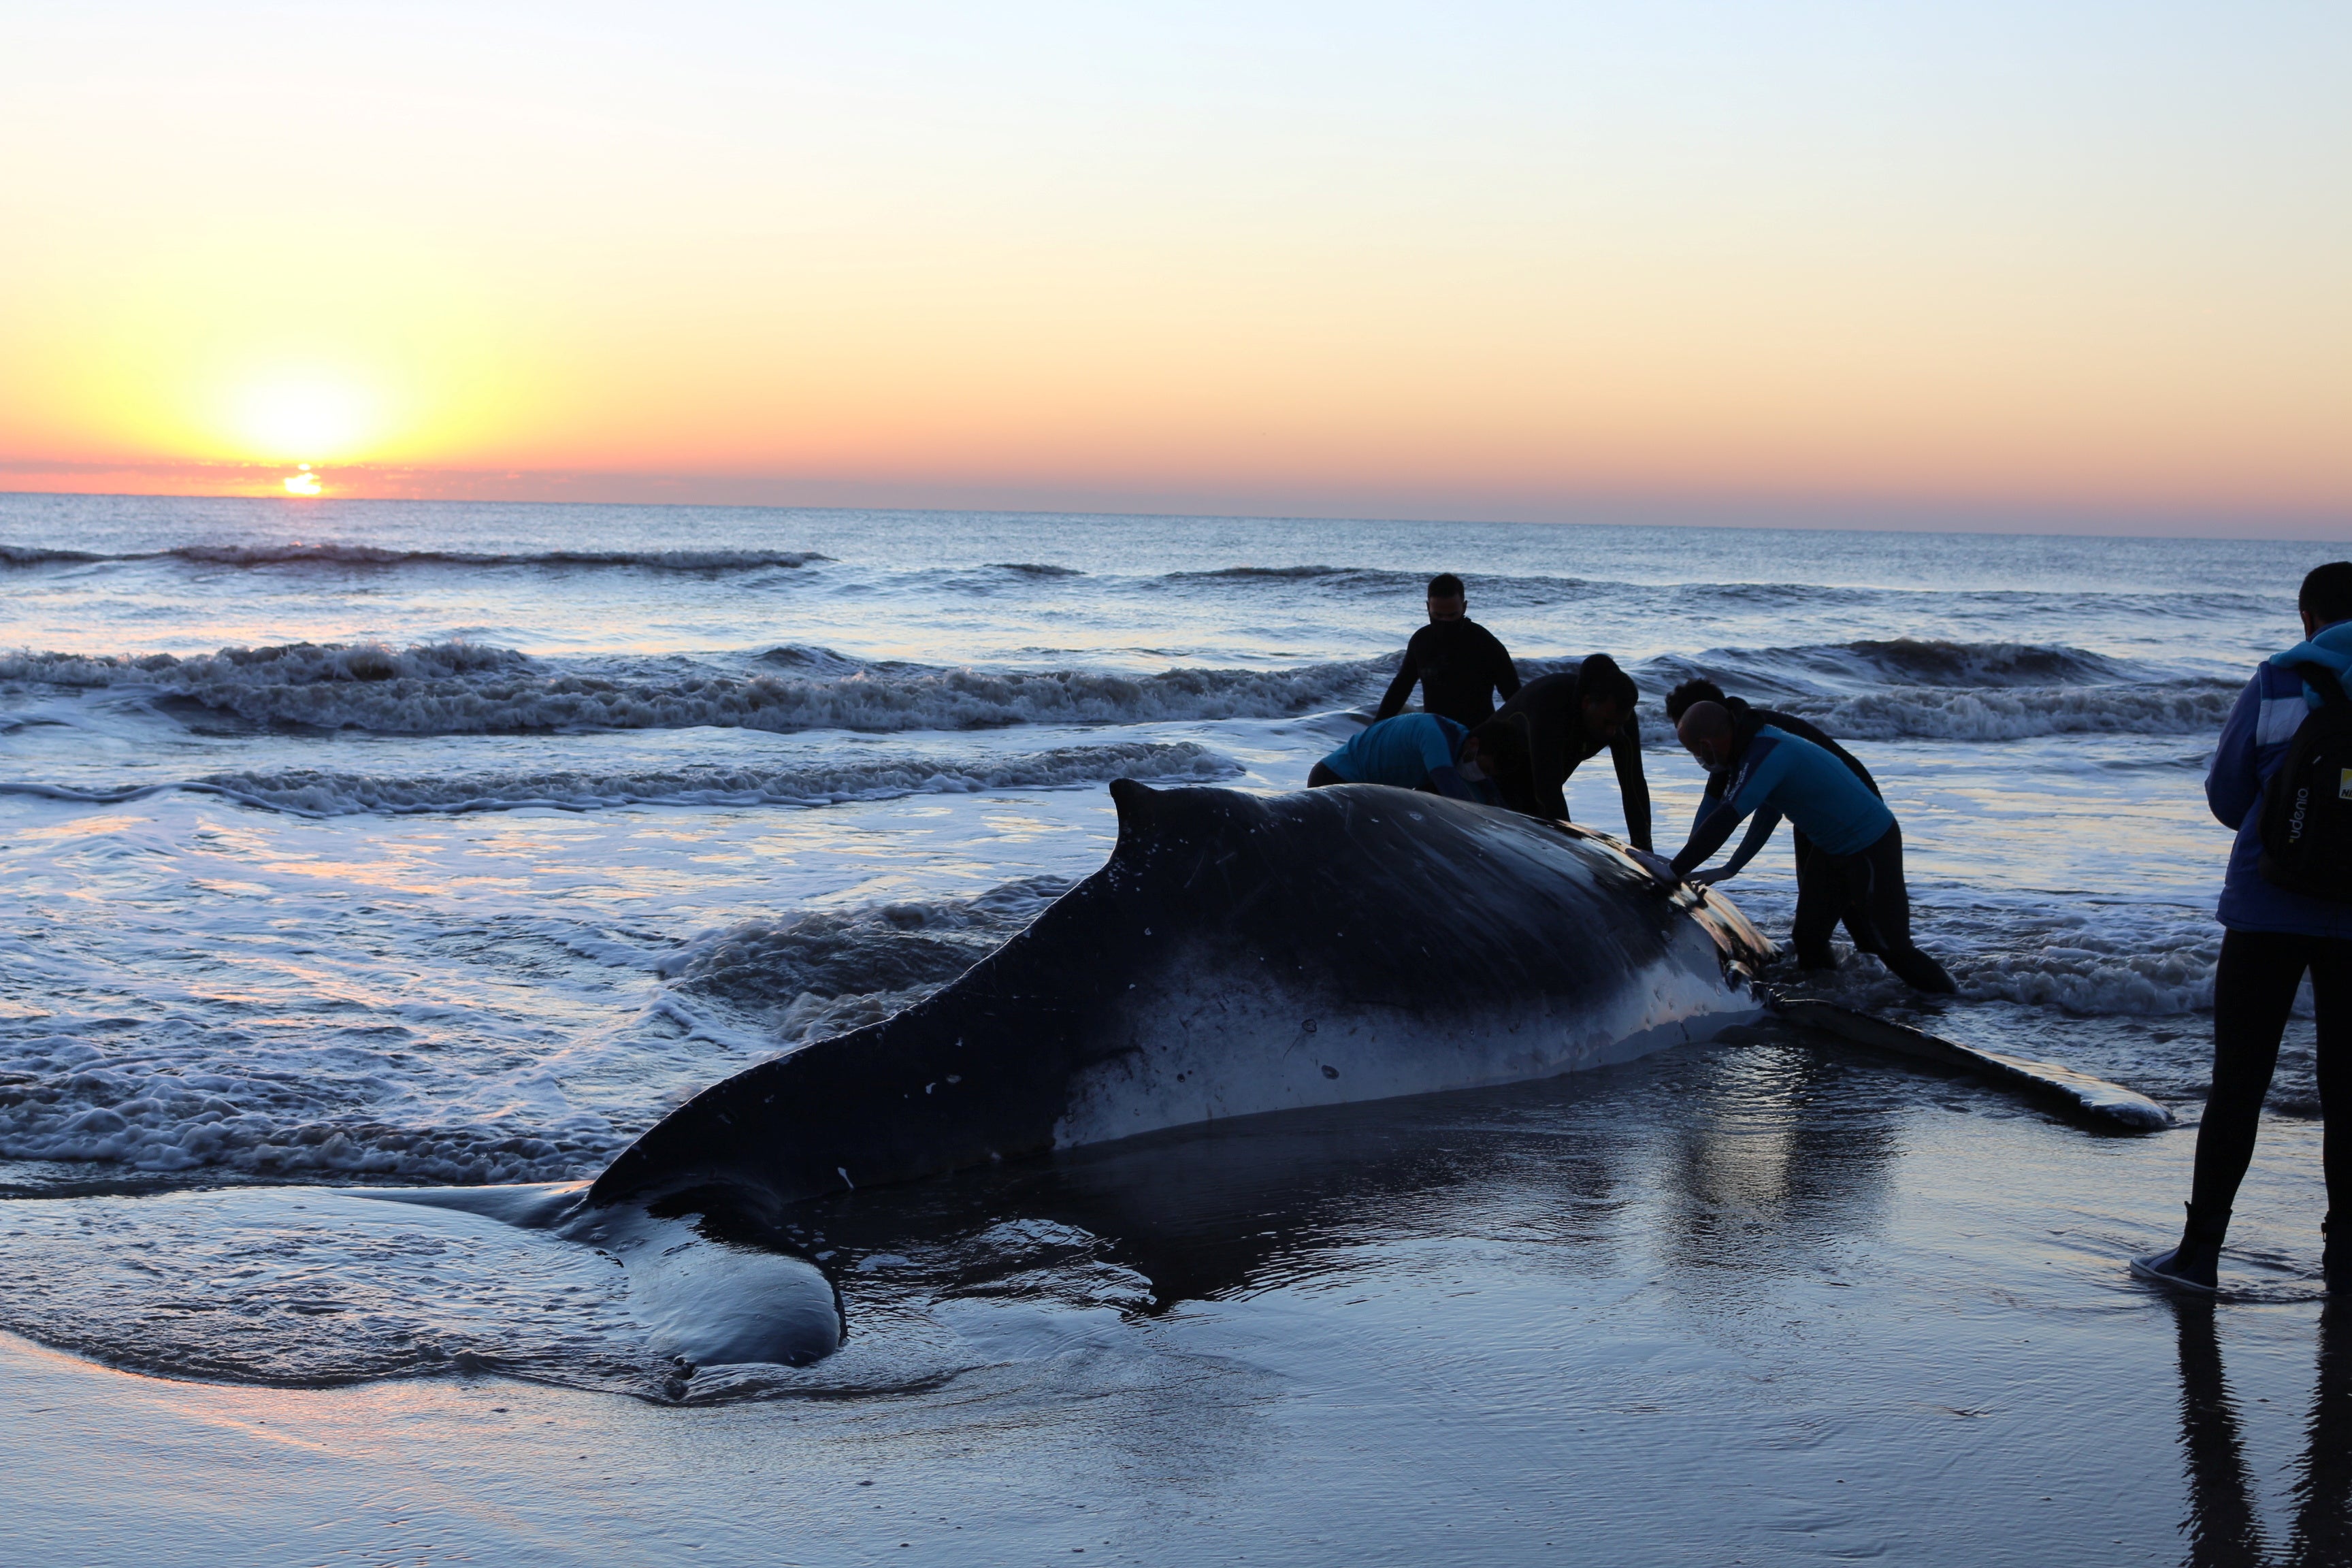 Rescuers push a stranded beached humpback whale back to the sea